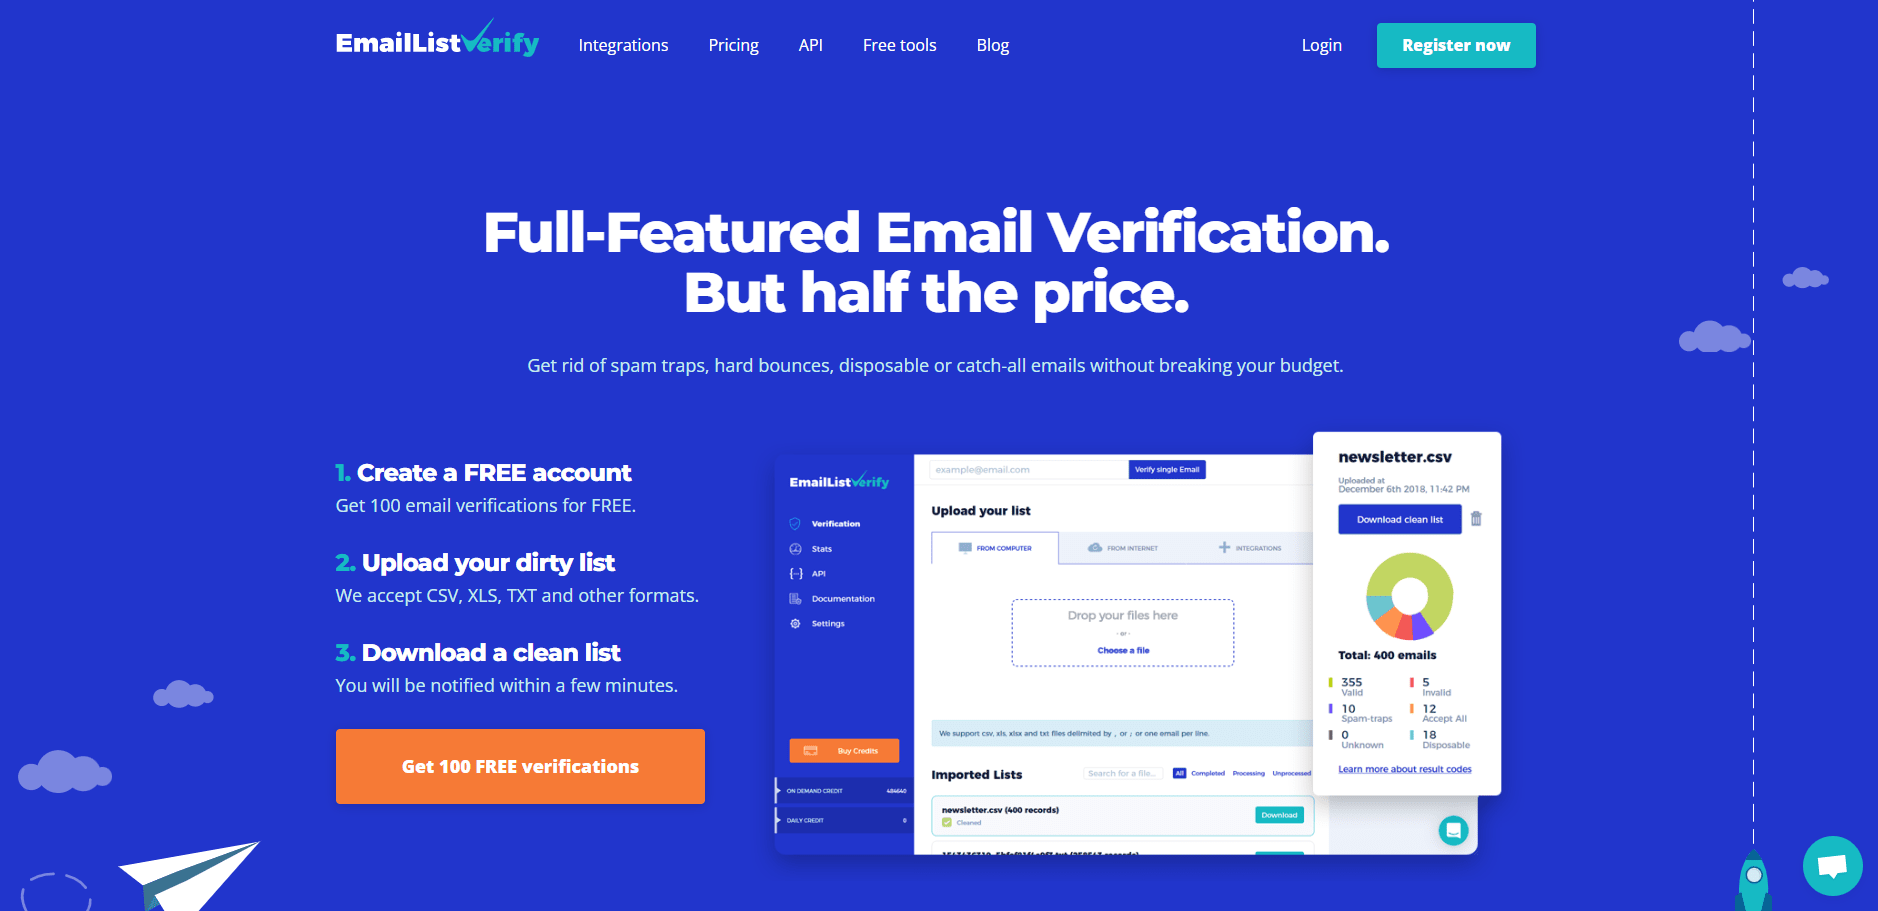 EmailListVerify Overview